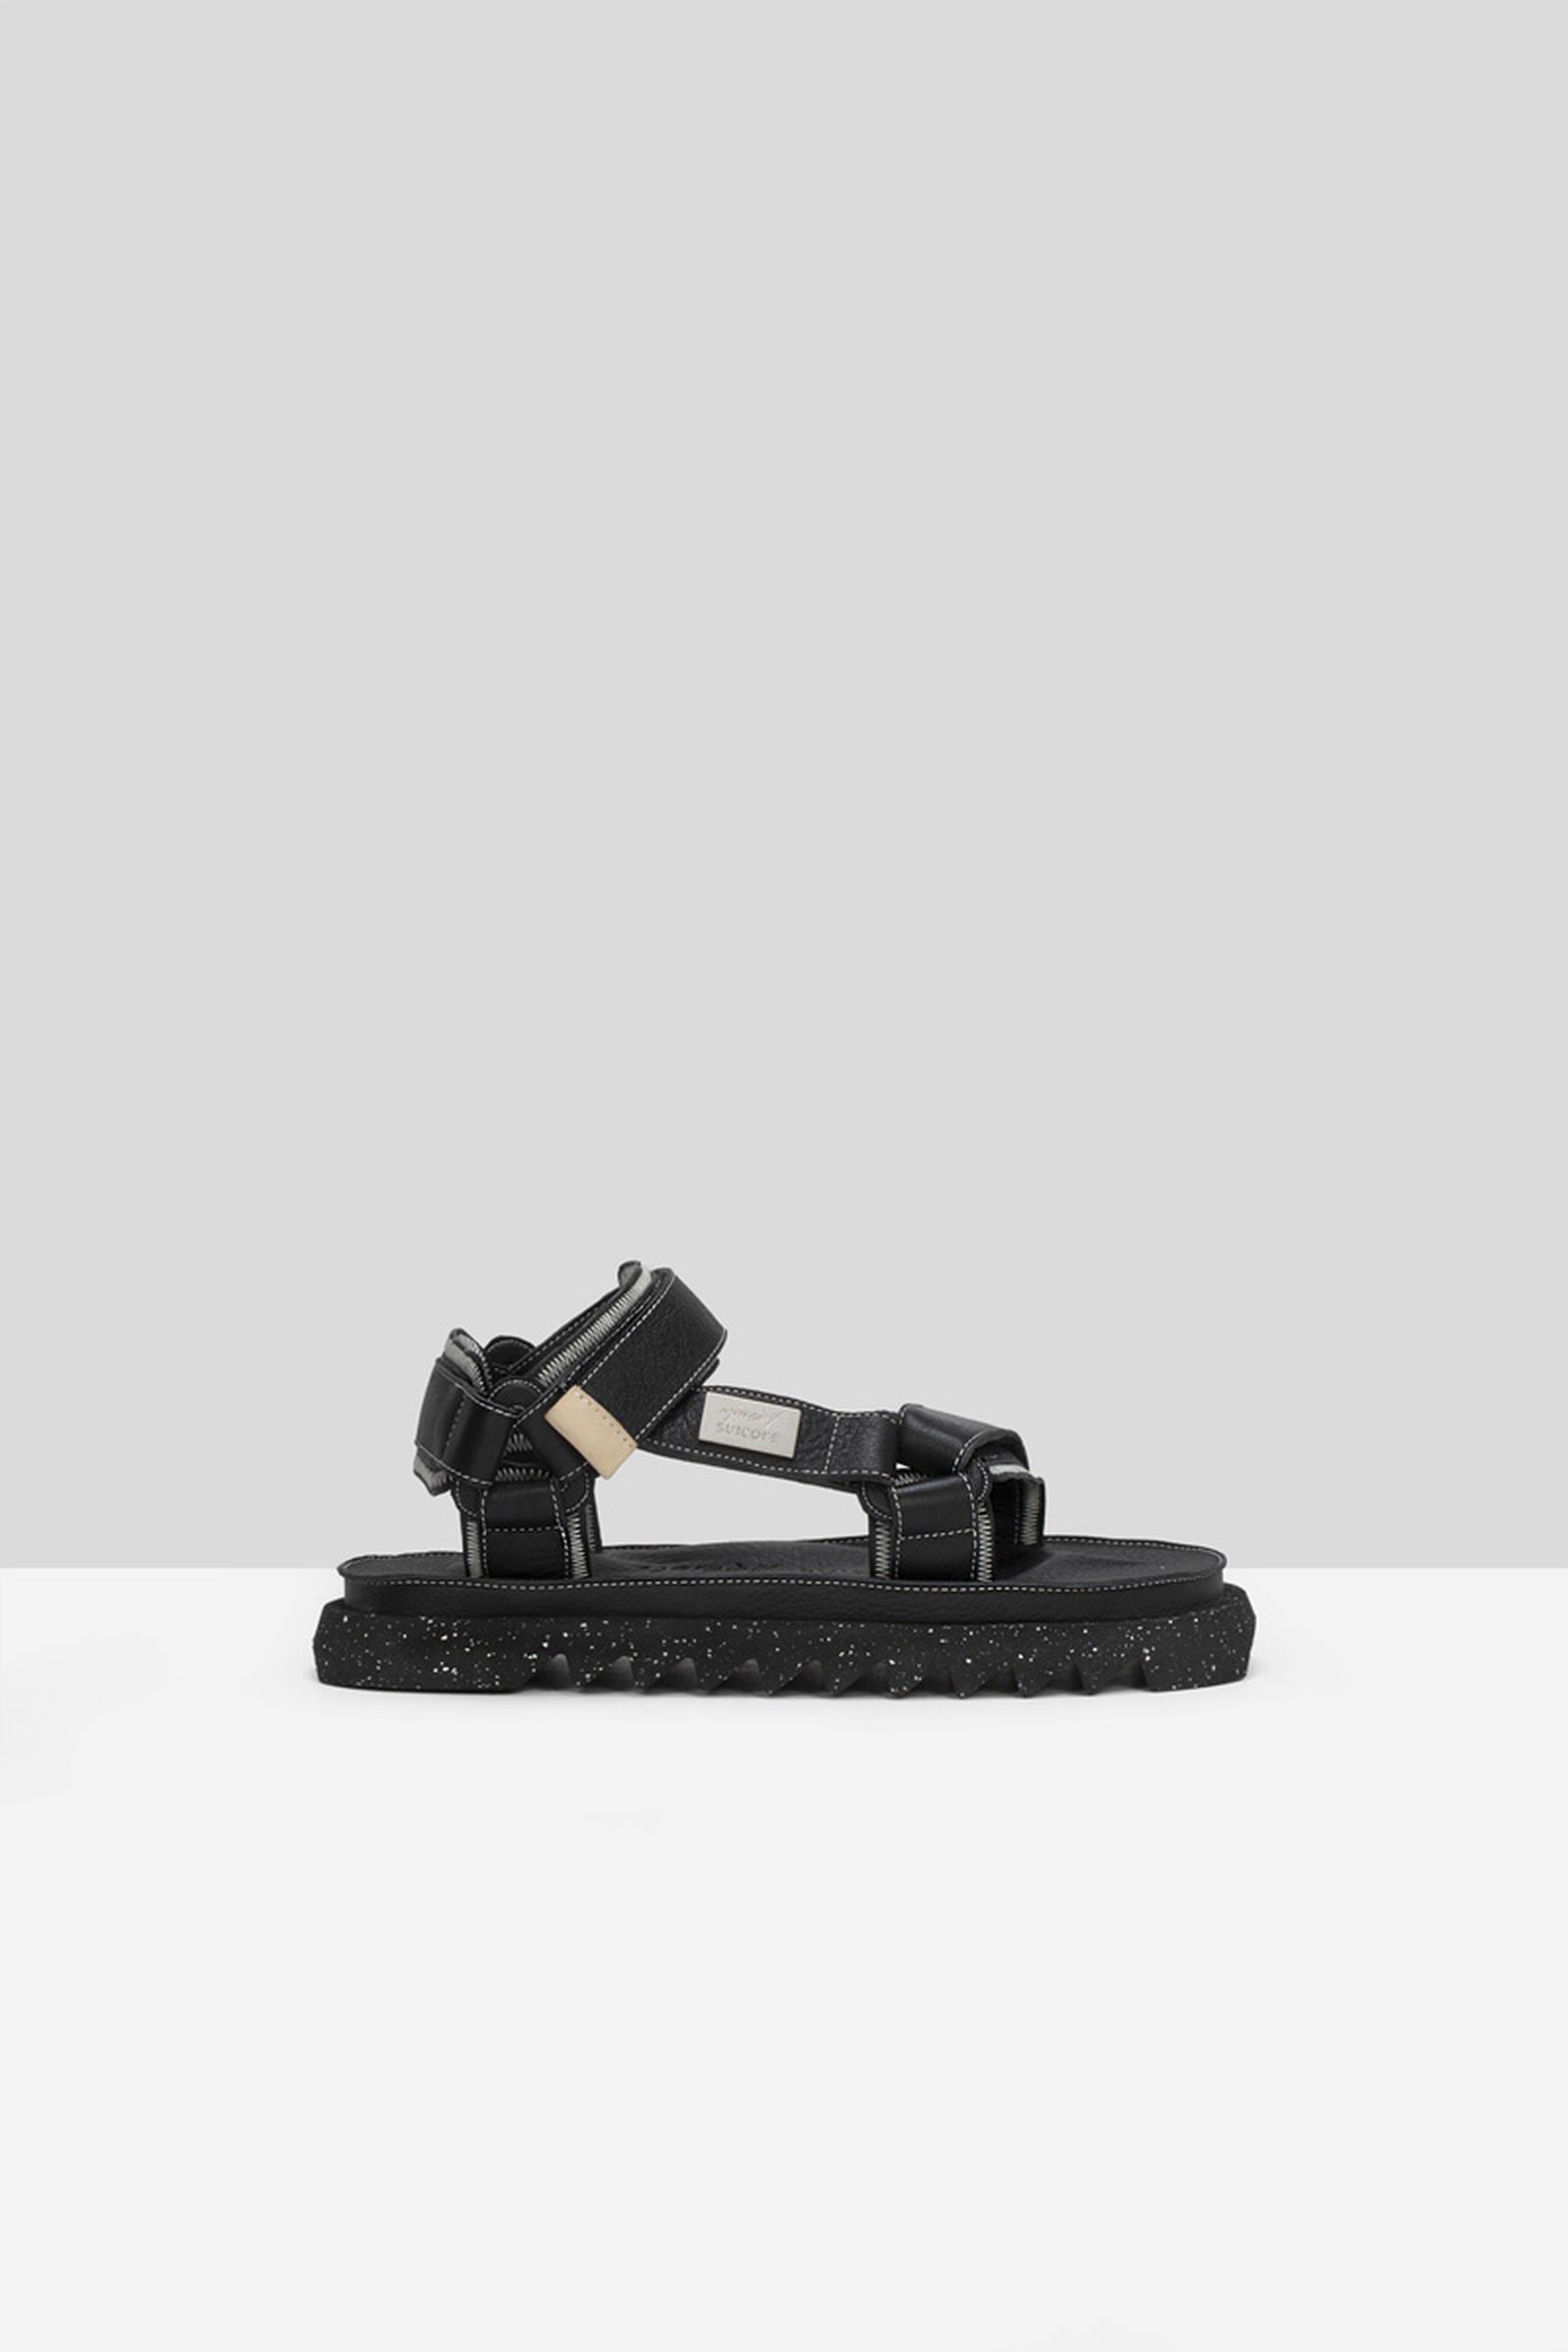 marsell-suicoke-ss21-collection-release-date-price-10